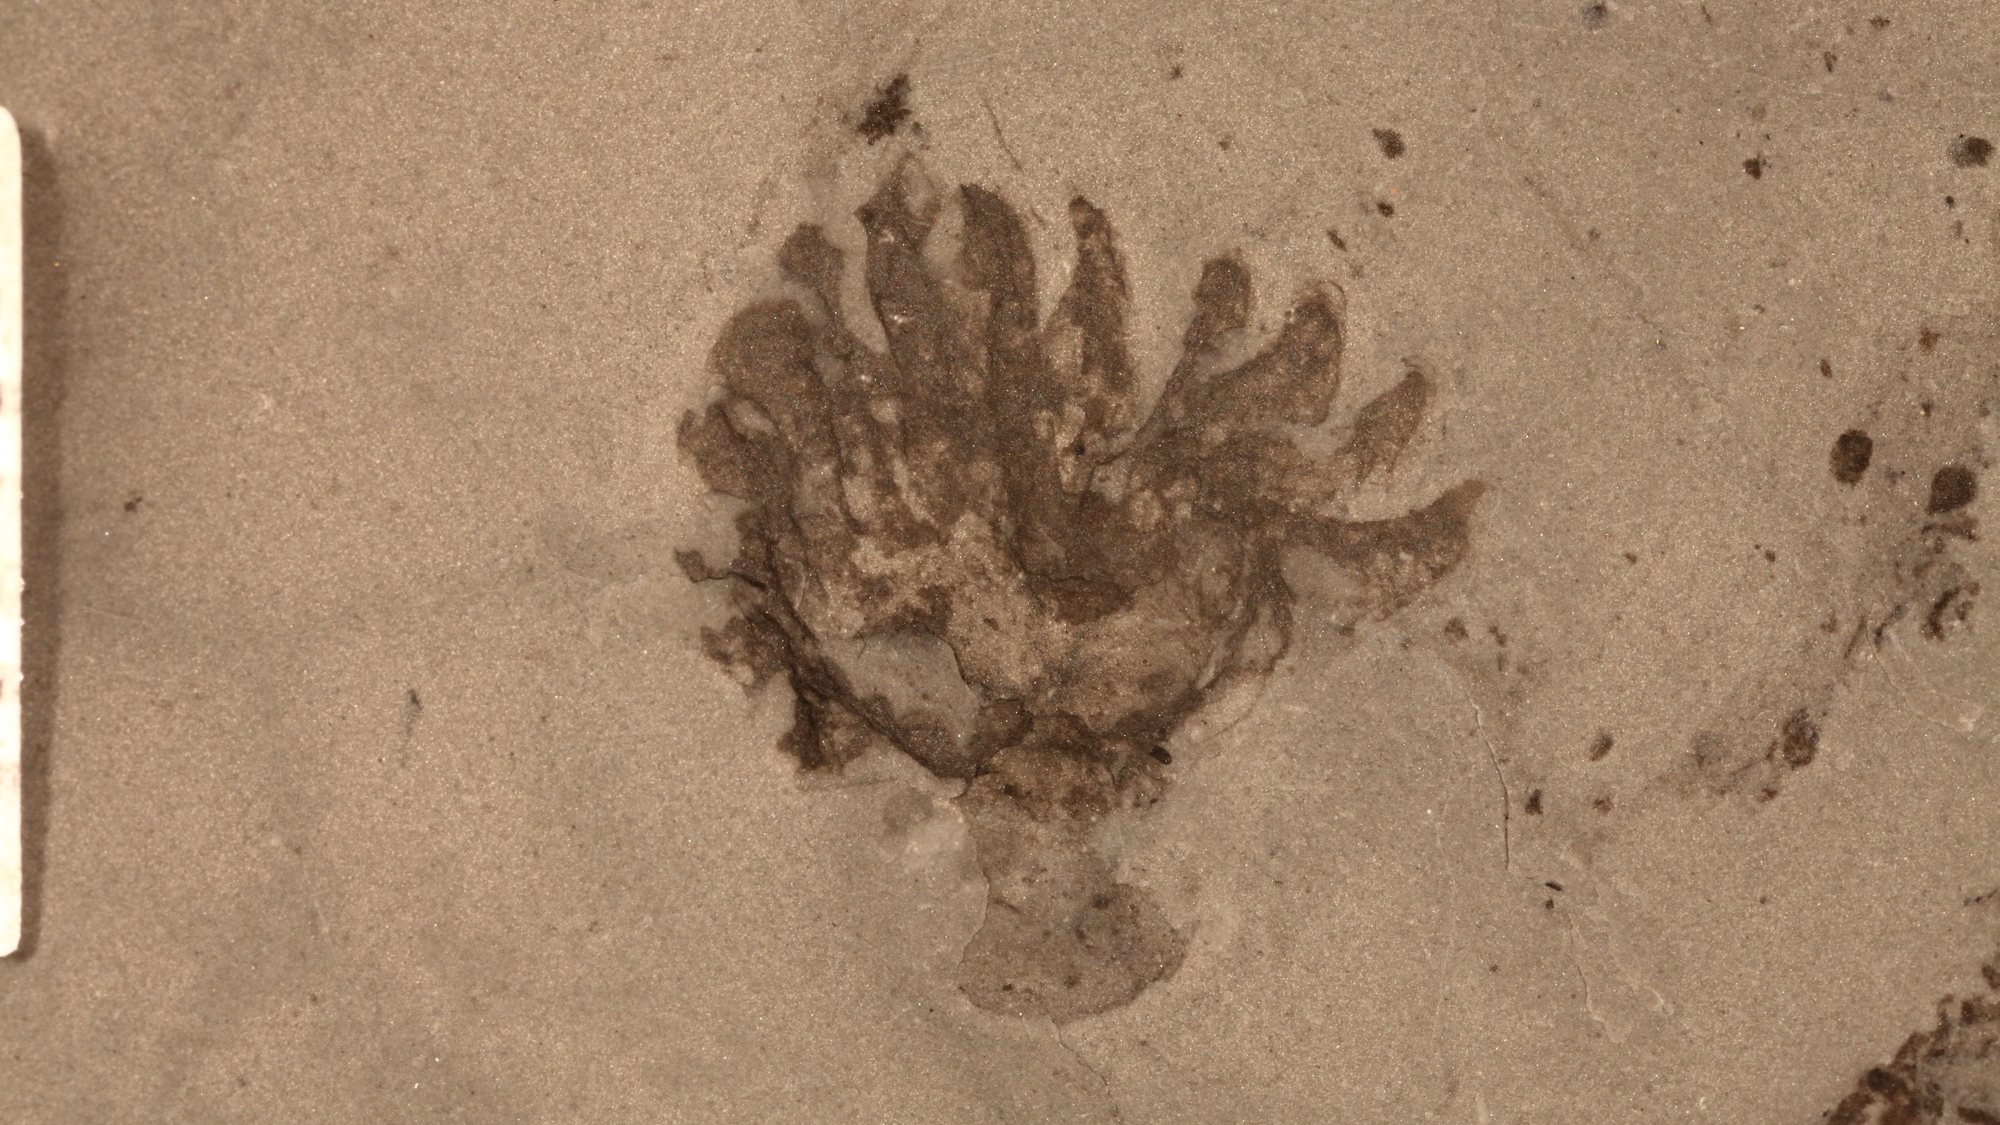 epa07463155 A handout photo made available by Northwest University of China on 26 March 2019 shows the Polyploid cnidarian fossil specimen from the Qingjiang biota collected in a river bed near the junction of the Danshui River with Qingjiang River in Hubei Province, China. Scientists claim they have made an immense discovery of thousands of fossils at a 518 million-year-old site found in a river bed near the junction of the Danshui River with Qingjiang River in Hubei, China. Known as the Qingjiang biota, the fossils are estimated to be about 518 million years old and of particular importance because of the well preservation of many soft tissues and soft-bodied organisms.  EPA/Northwest University of China / HANDOUT  HANDOUT EDITORIAL USE ONLY/NO SALES